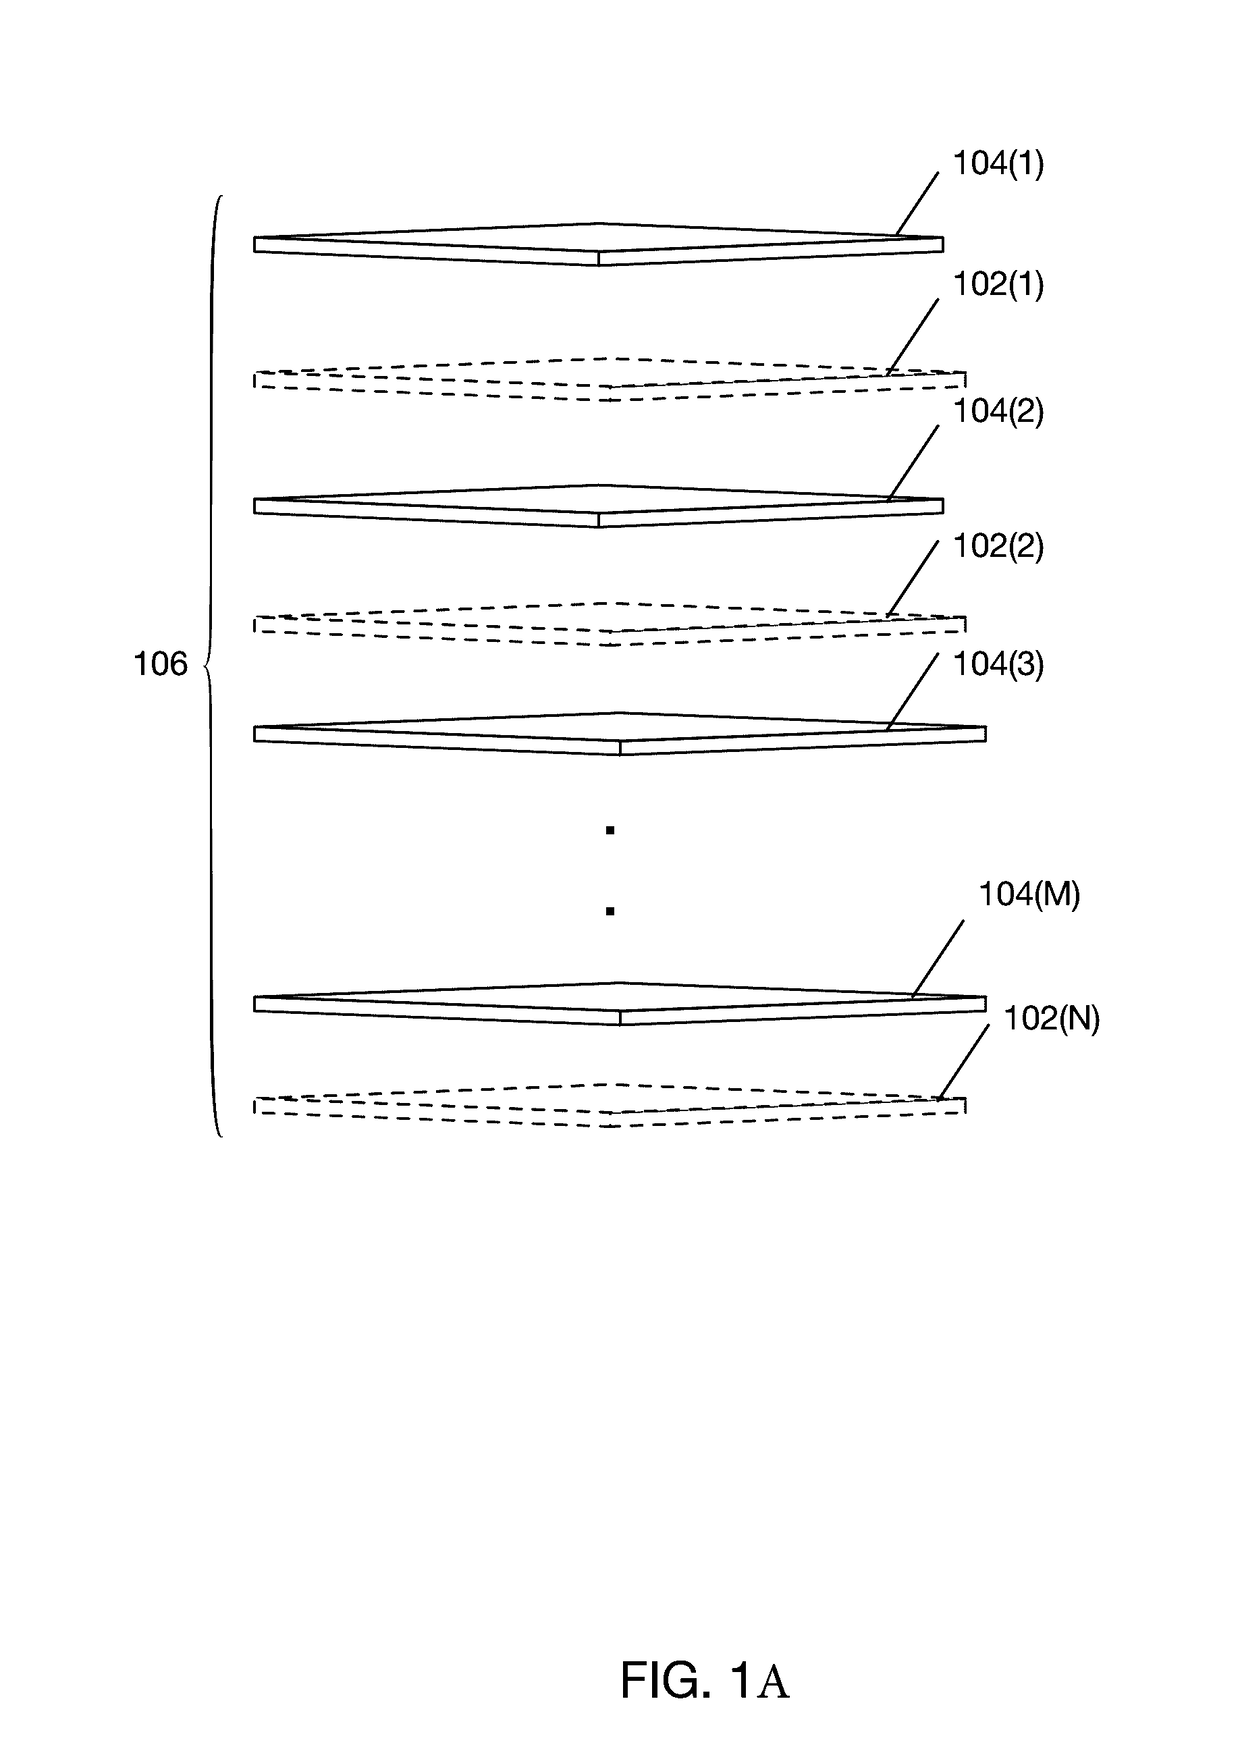 Carrier for mounting optical elements and associated fabrication process